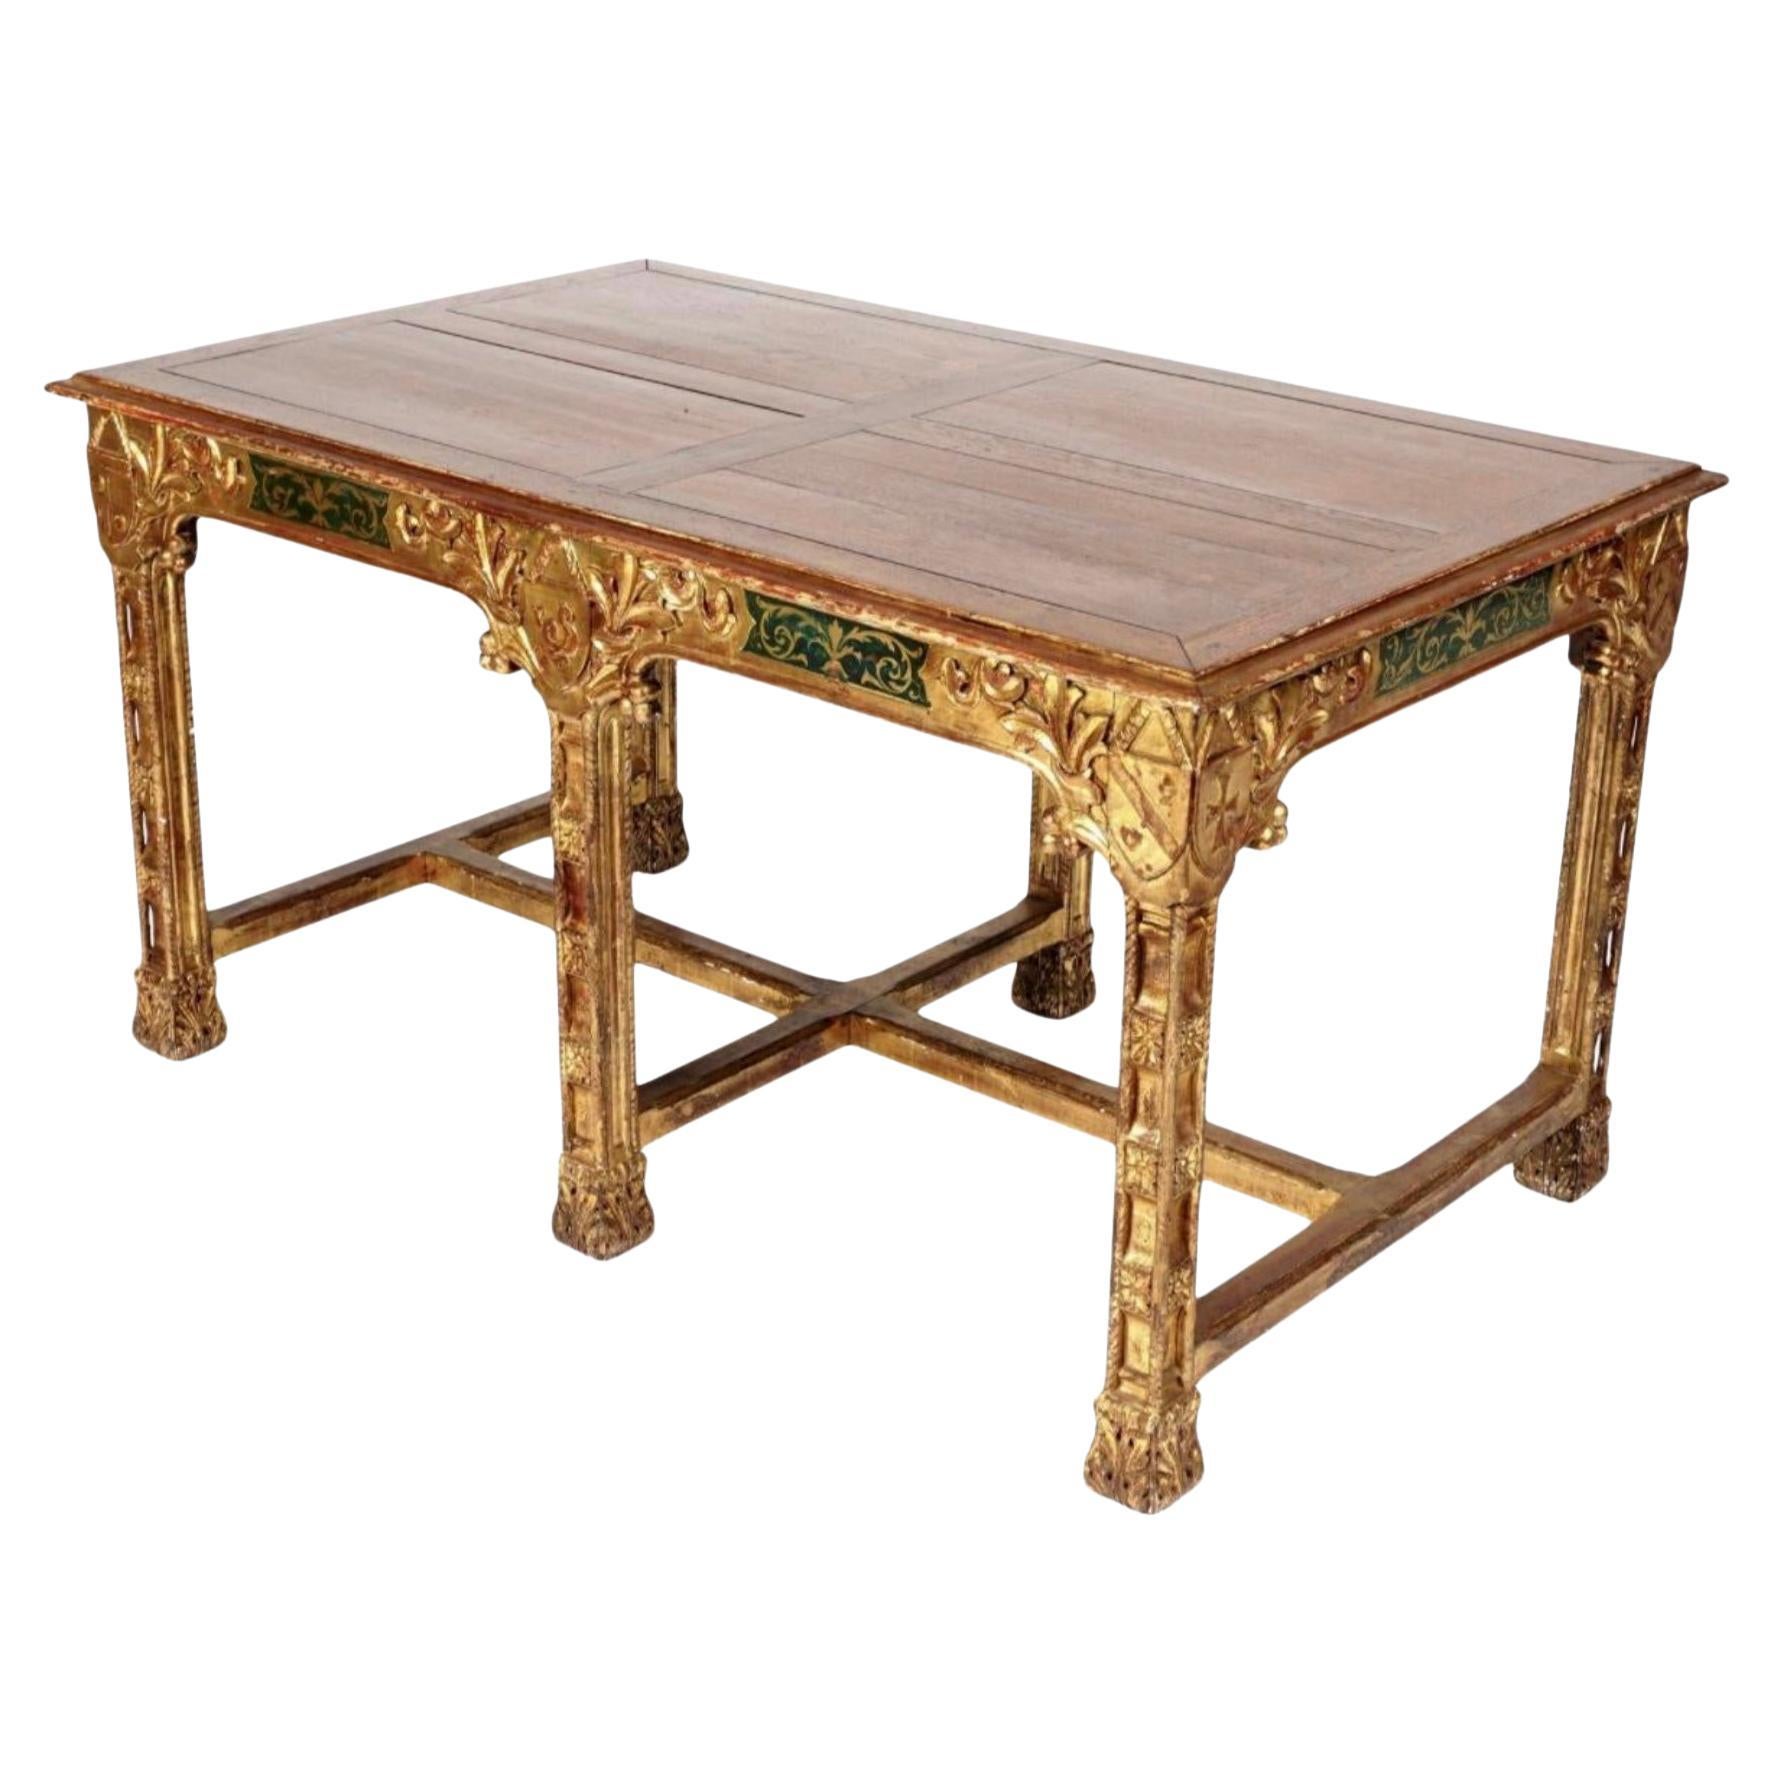 Belgian Gothic Revival Center Table For Sale at 1stDibs